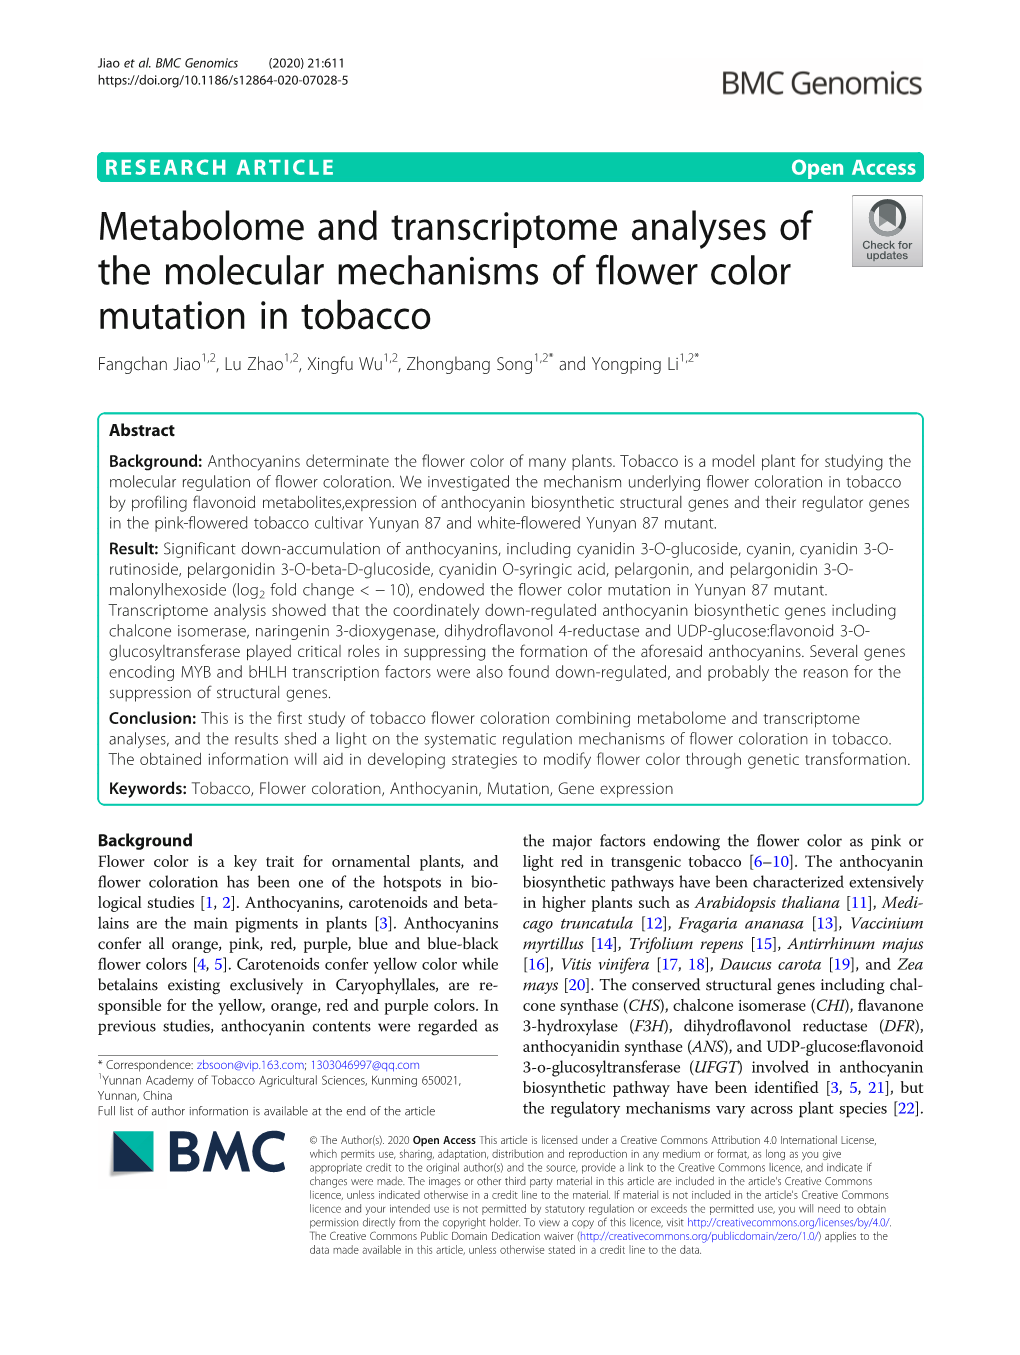 Metabolome and Transcriptome Analyses of the Molecular